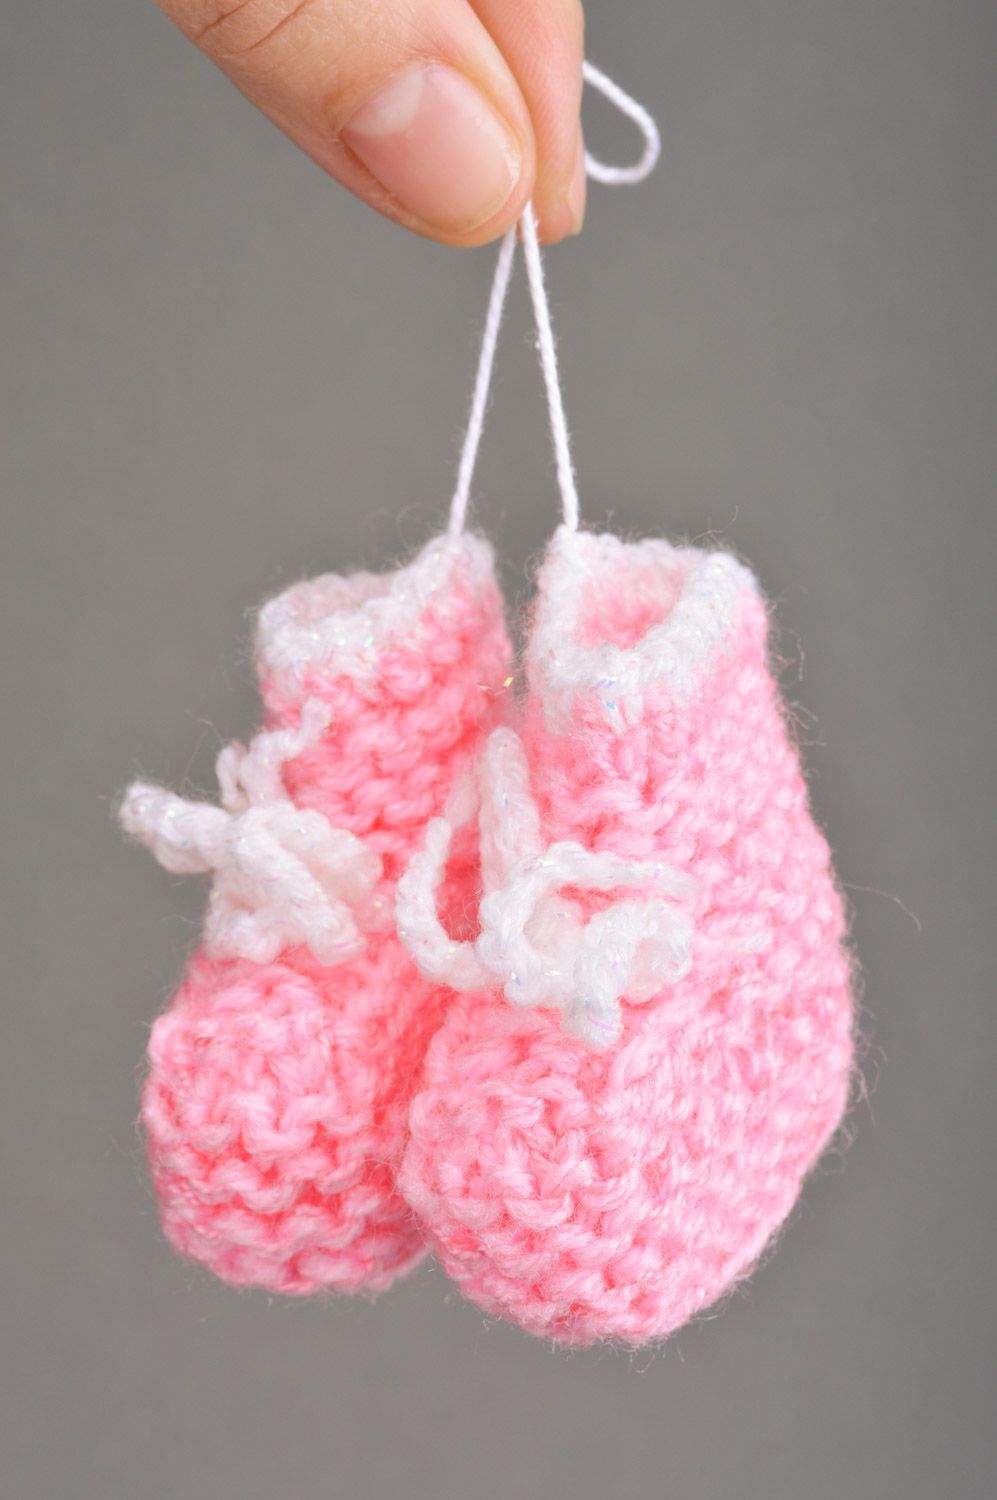 Handmade decorative wall hanging baby shoes knitted of semi-woolen pink threads photo 3